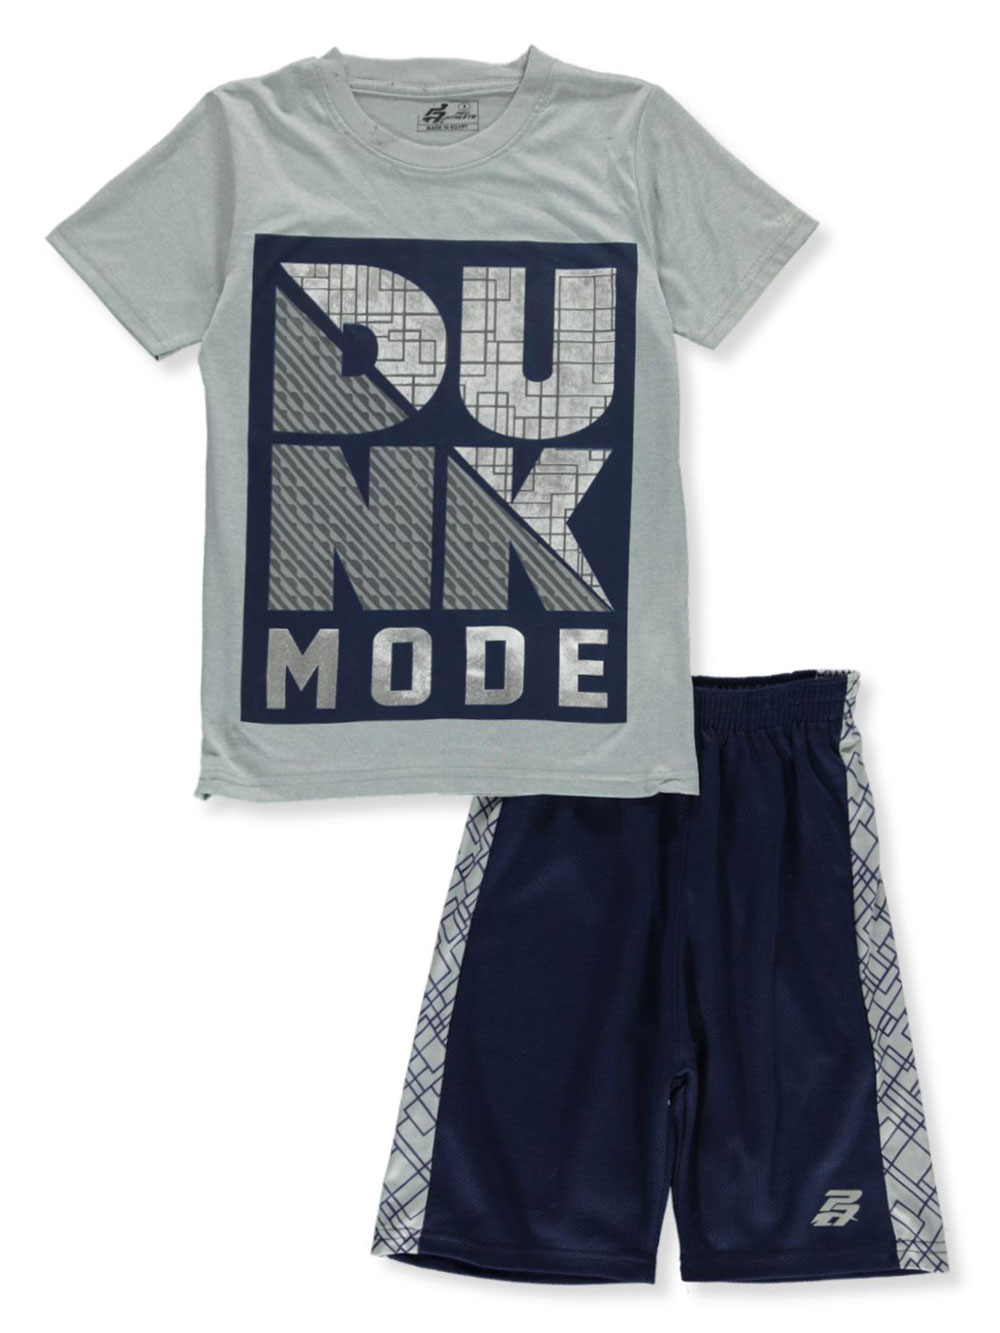 Size 10-12 Sets for Boys